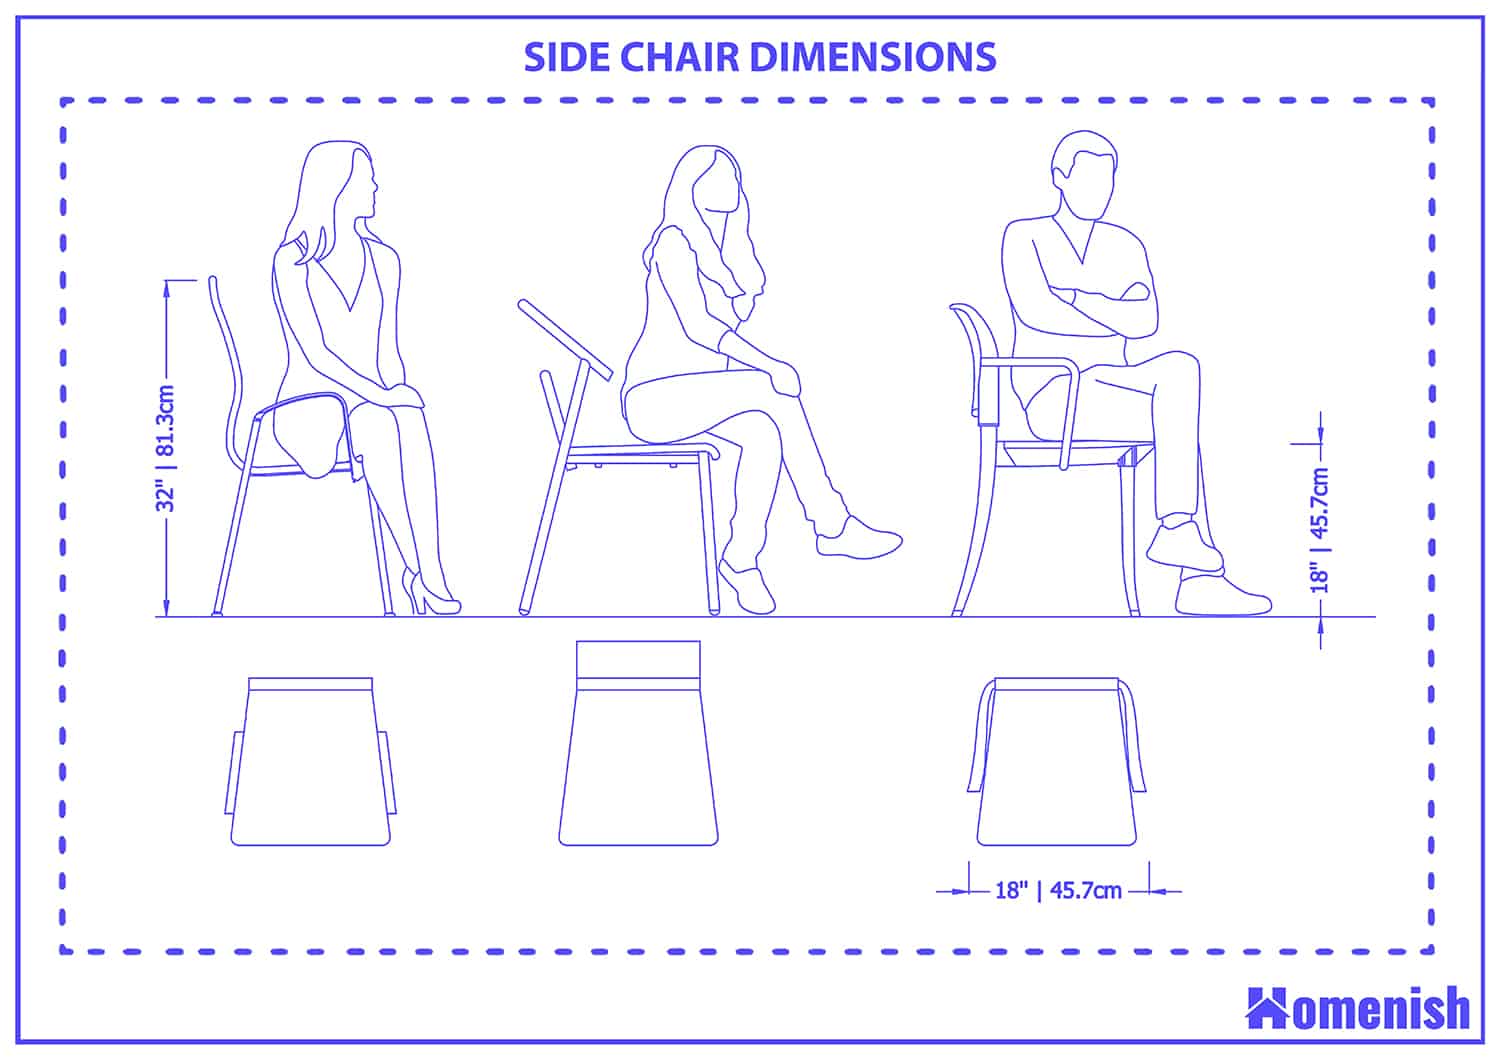 Side chair dimensions